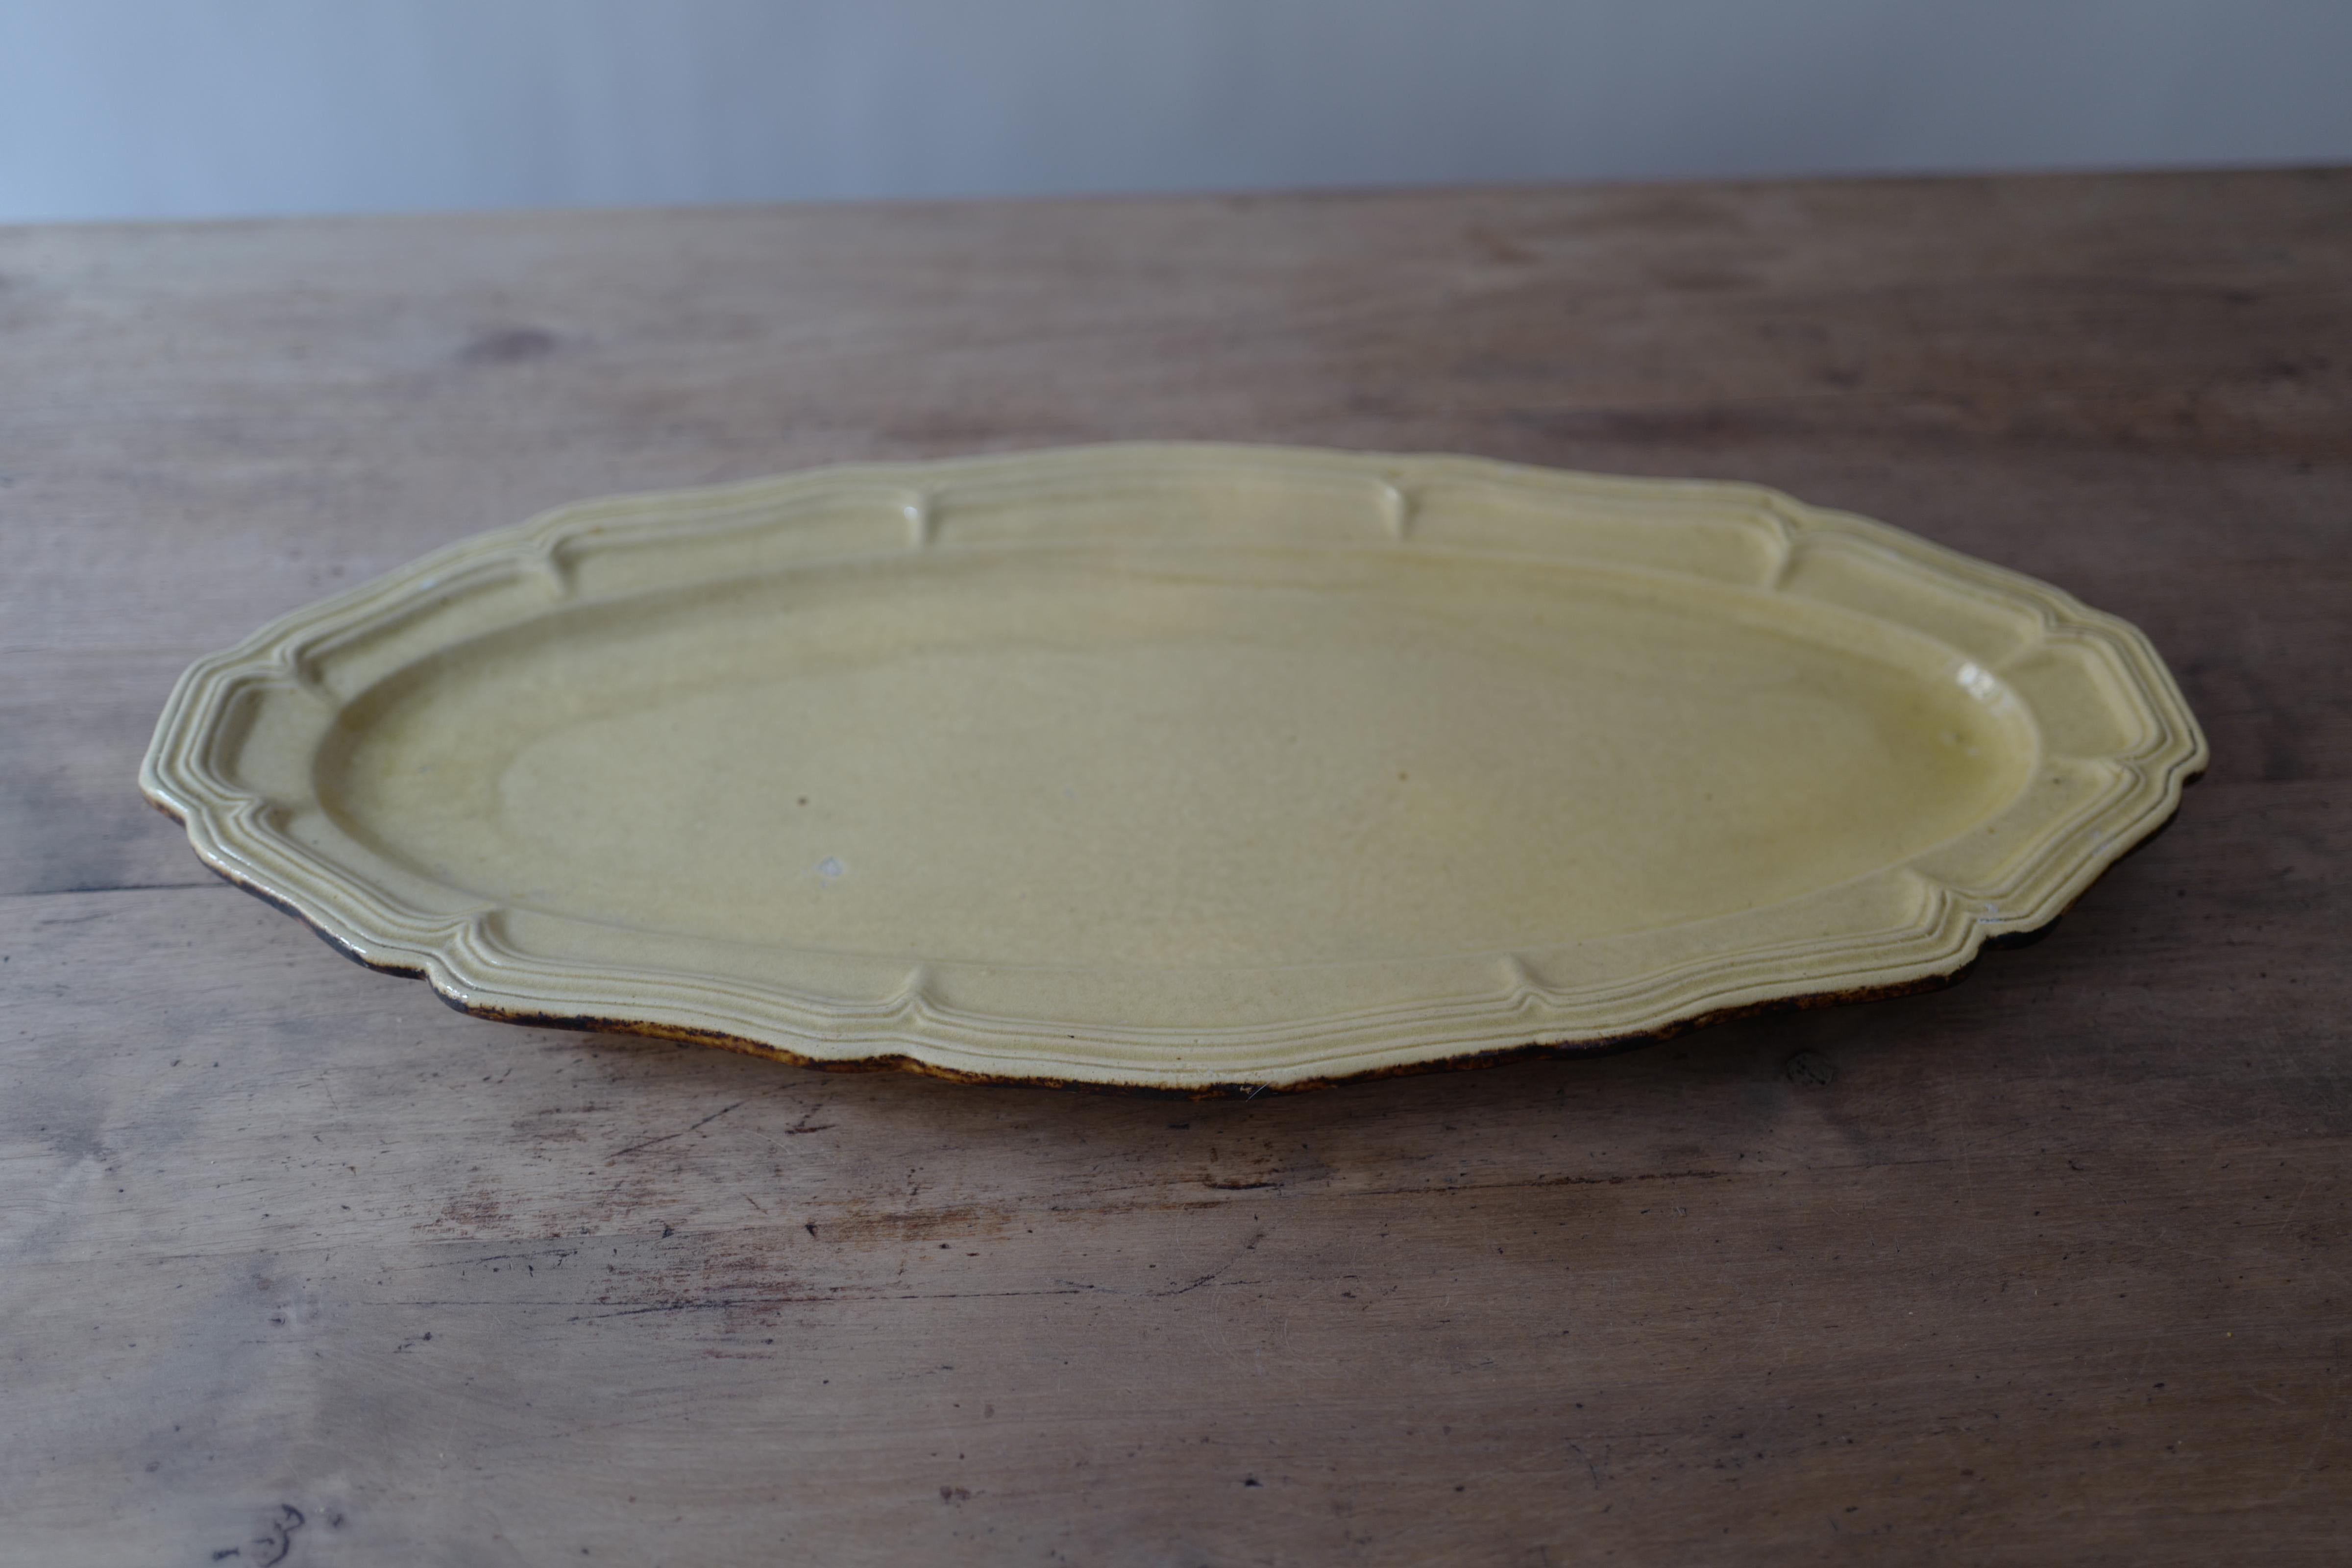 Dieulefit Poteries de Haute Provence Yellow glazed earthenware scalloped edge trimmed in brown serving platter from village of Dieulefit circa 1950's. 